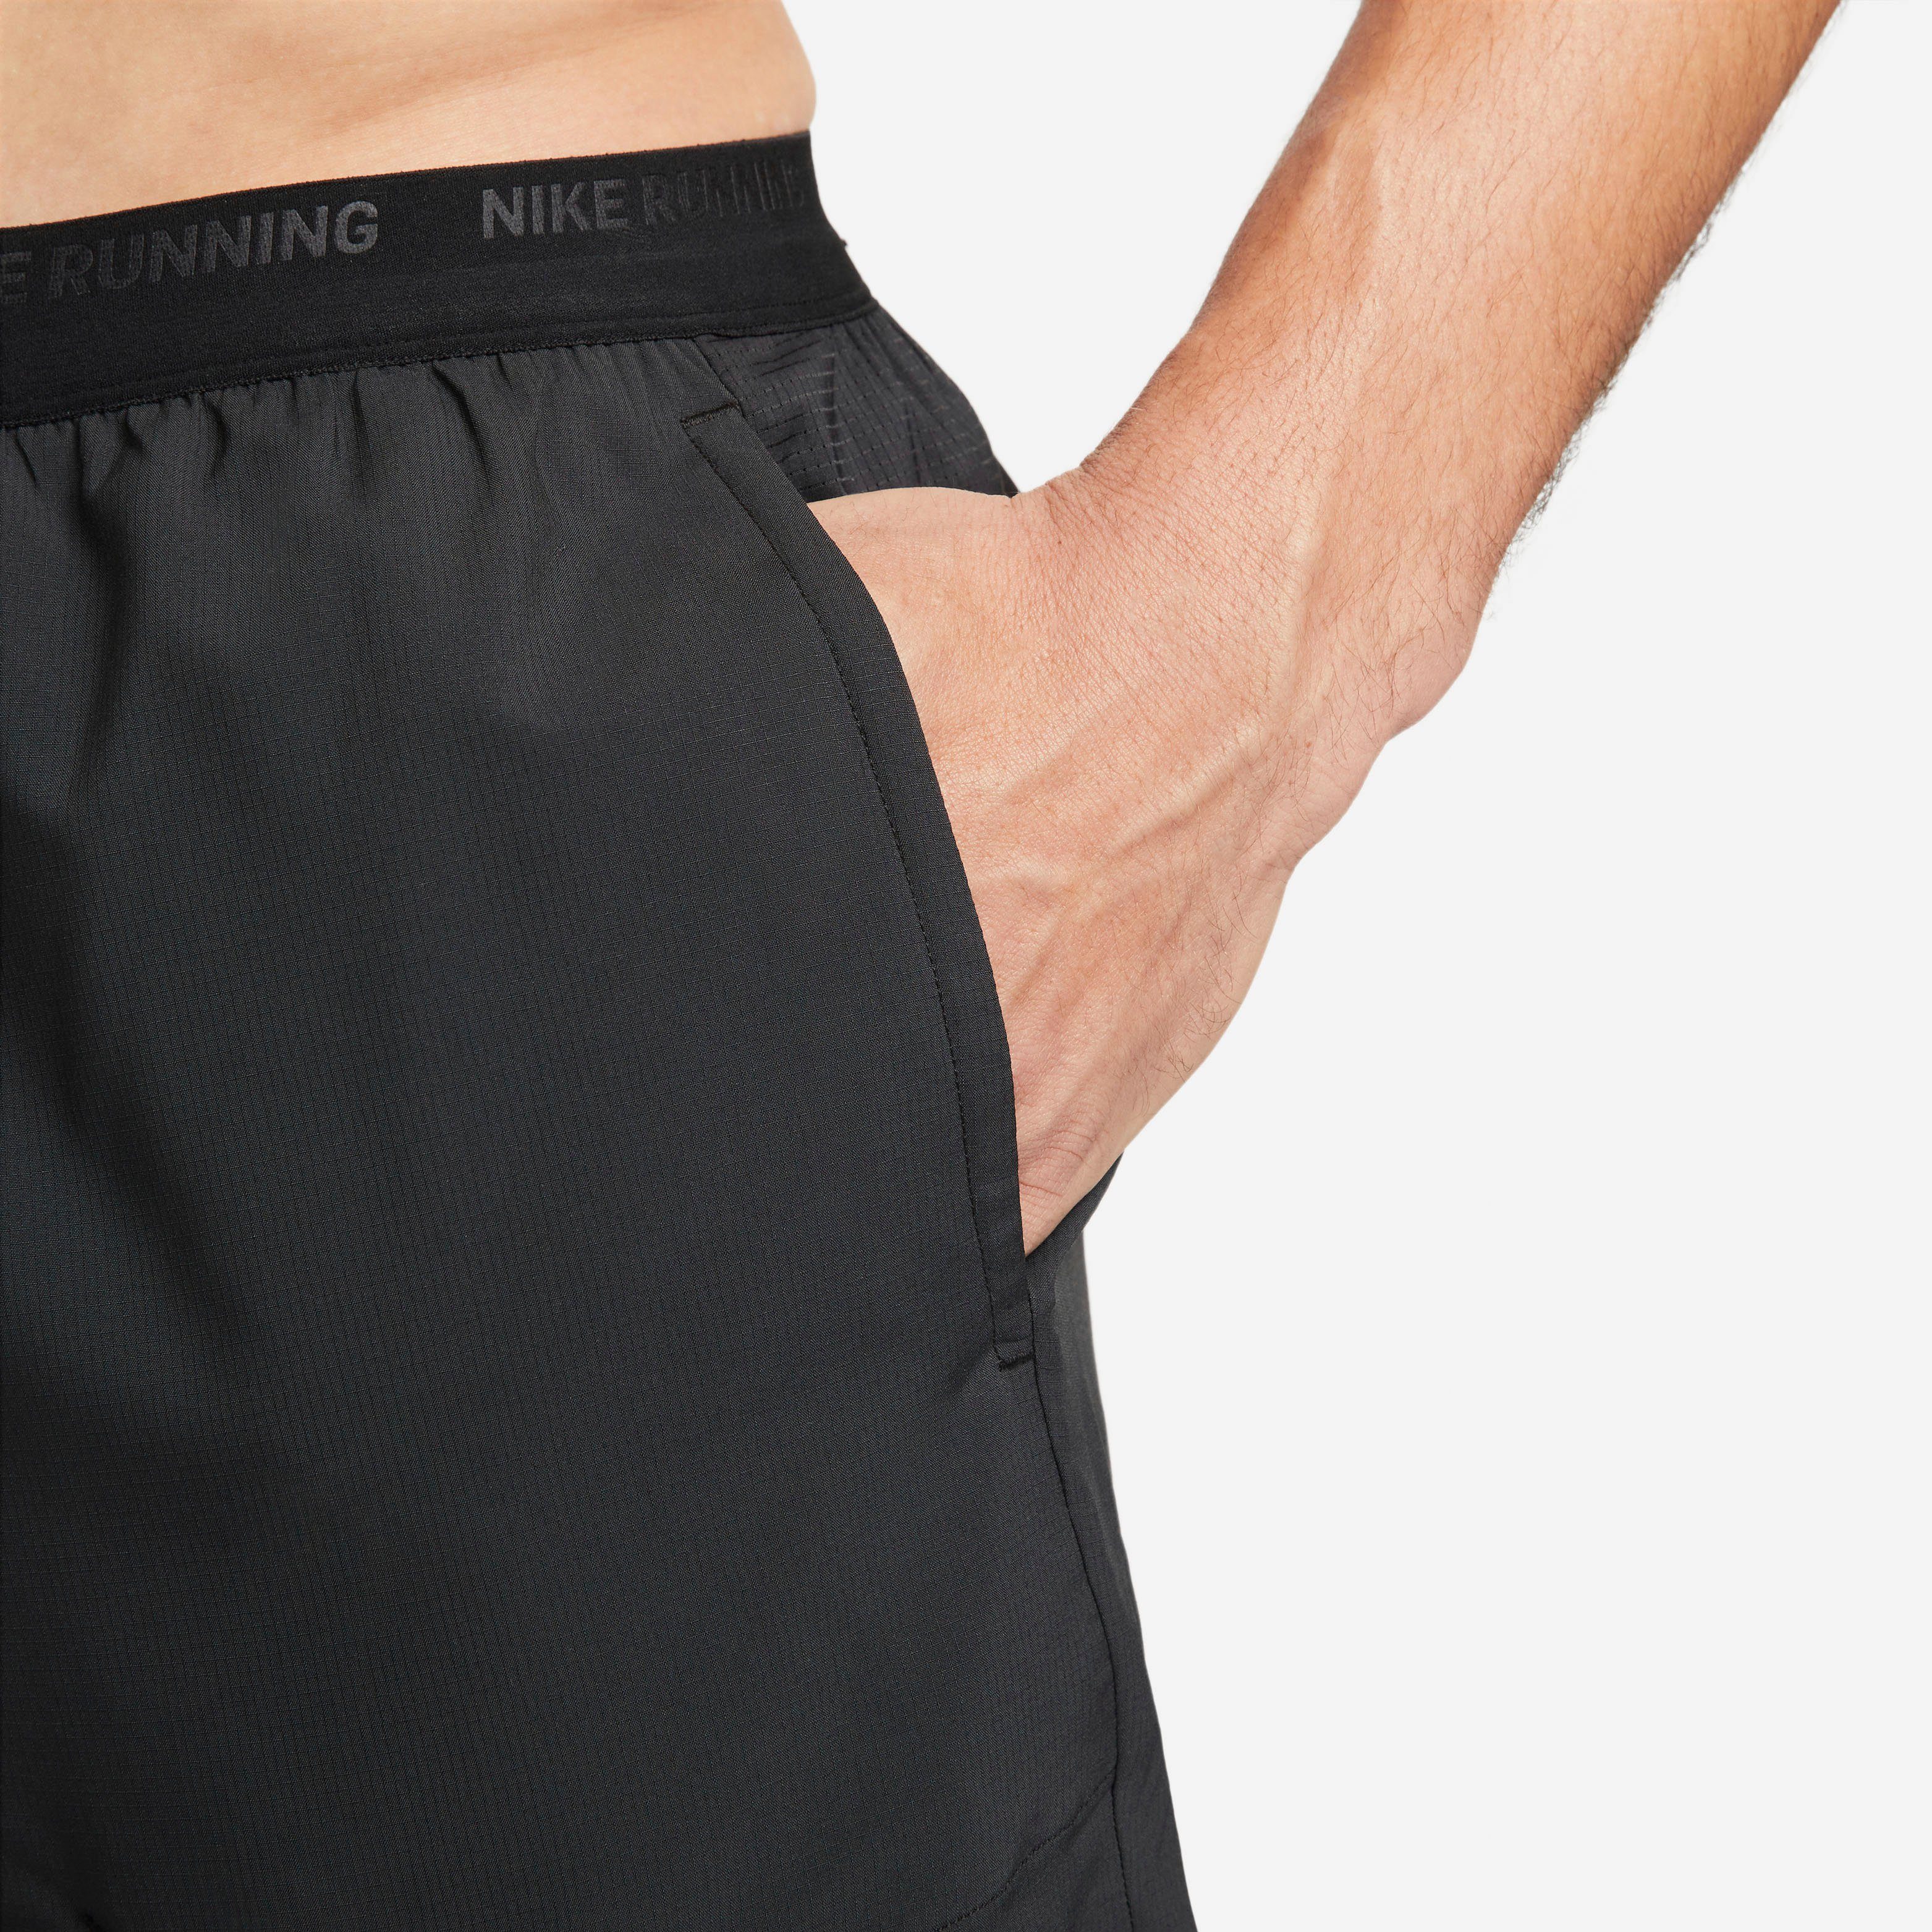 Stride Men's Brief-Lined Nike Running Laufshorts Shorts " Dri-FIT